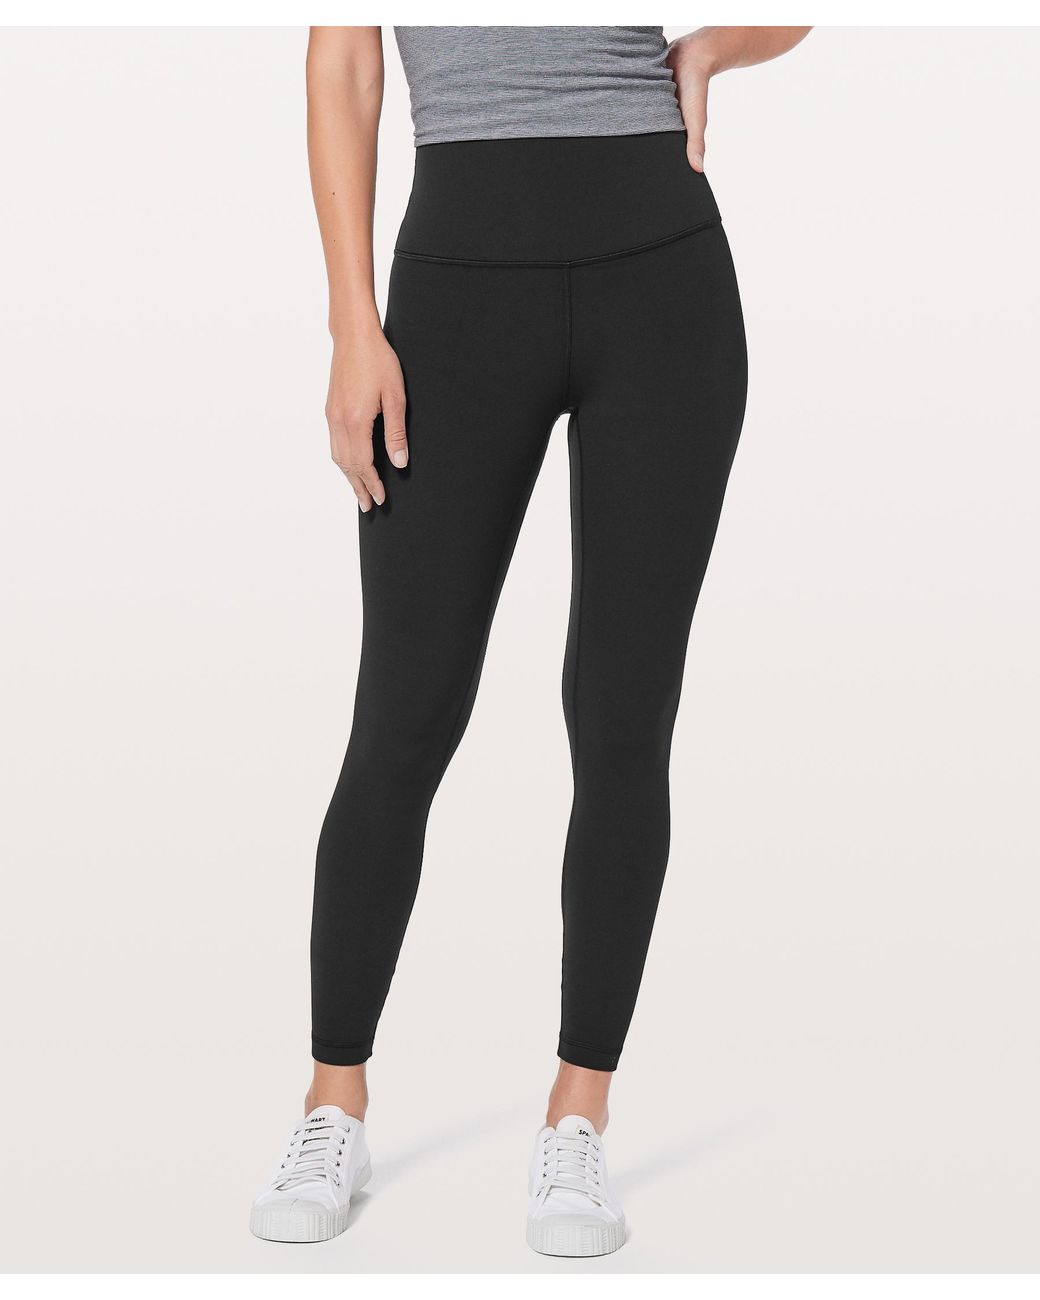 Lululemon Athletica Pant Material Safety